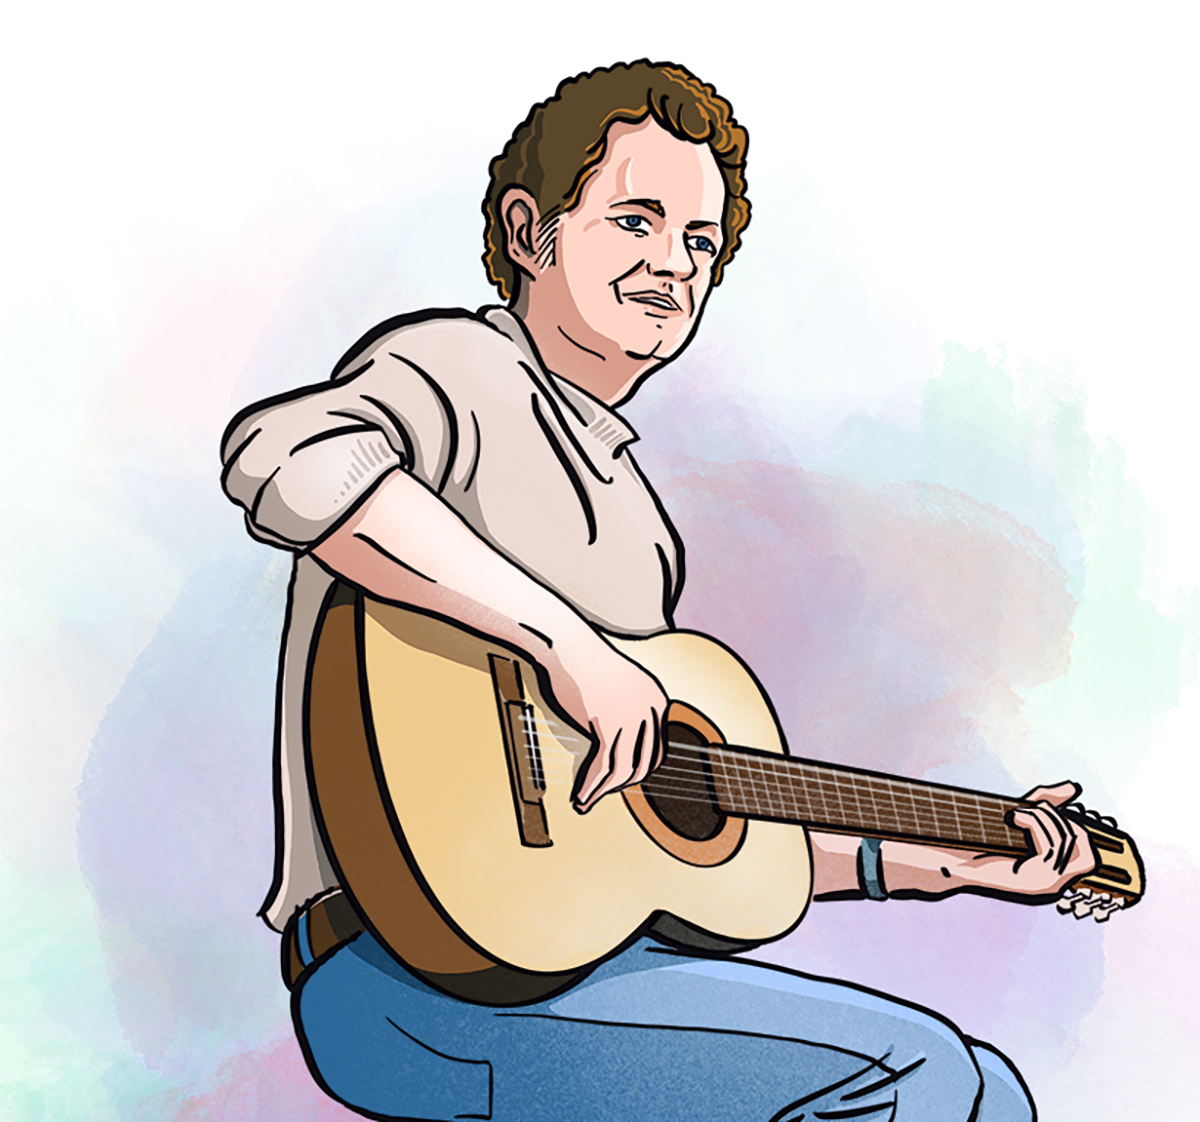 Singer/songwriter/activist Harry Chapin is the subject of a new book by Ira Kantor '06.